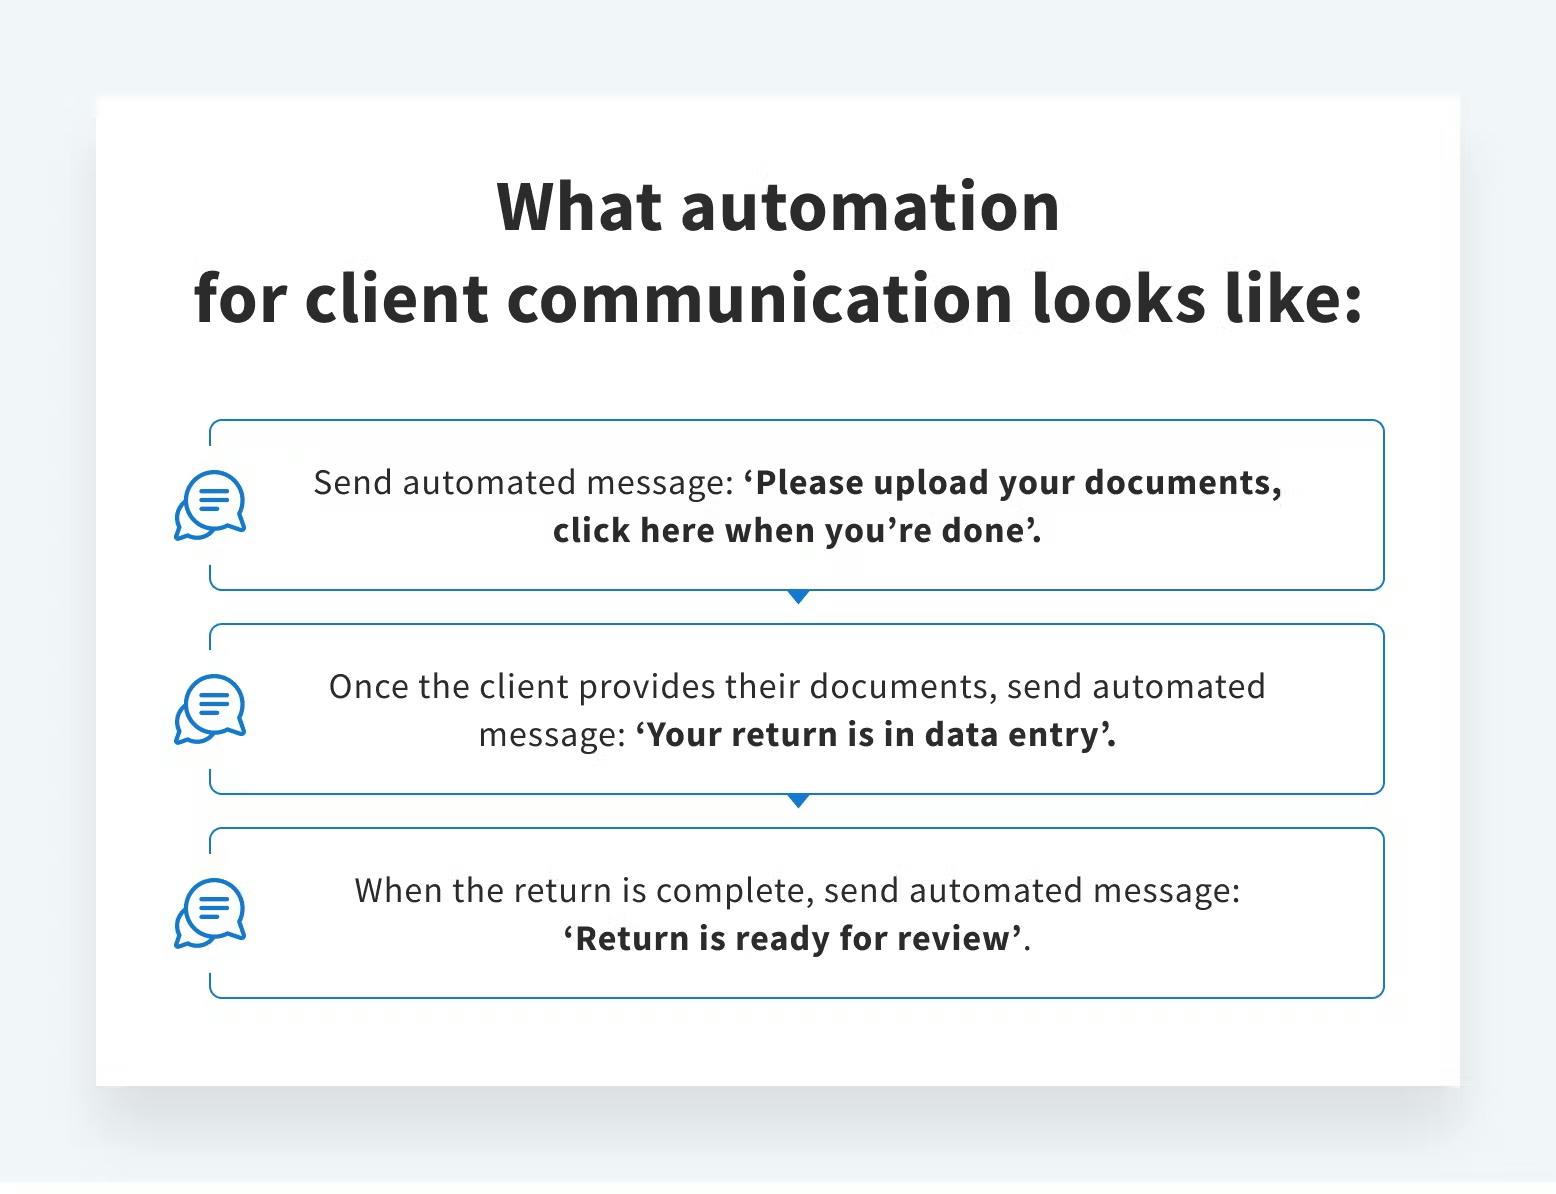 An infographic showing what automated client communication can look like.